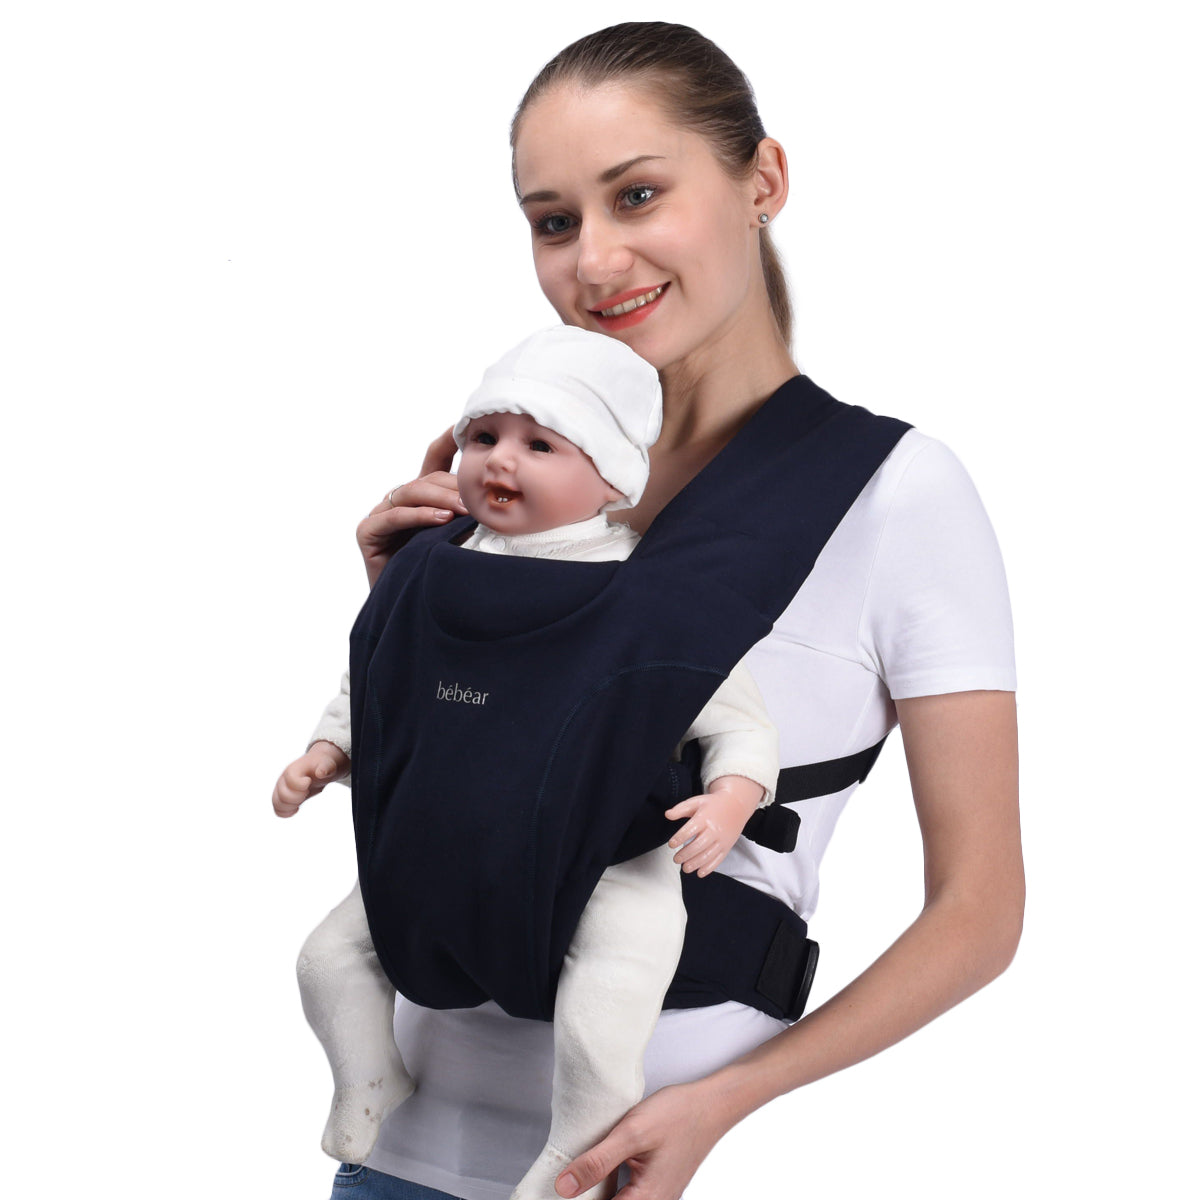 Bebamour Baby Wrap Carrier Adjustable for All Body Types Baby Carrier Wrap for Newborns & Infants Black Classic #1 Baby Wrap Perfect for Mom & Dad 